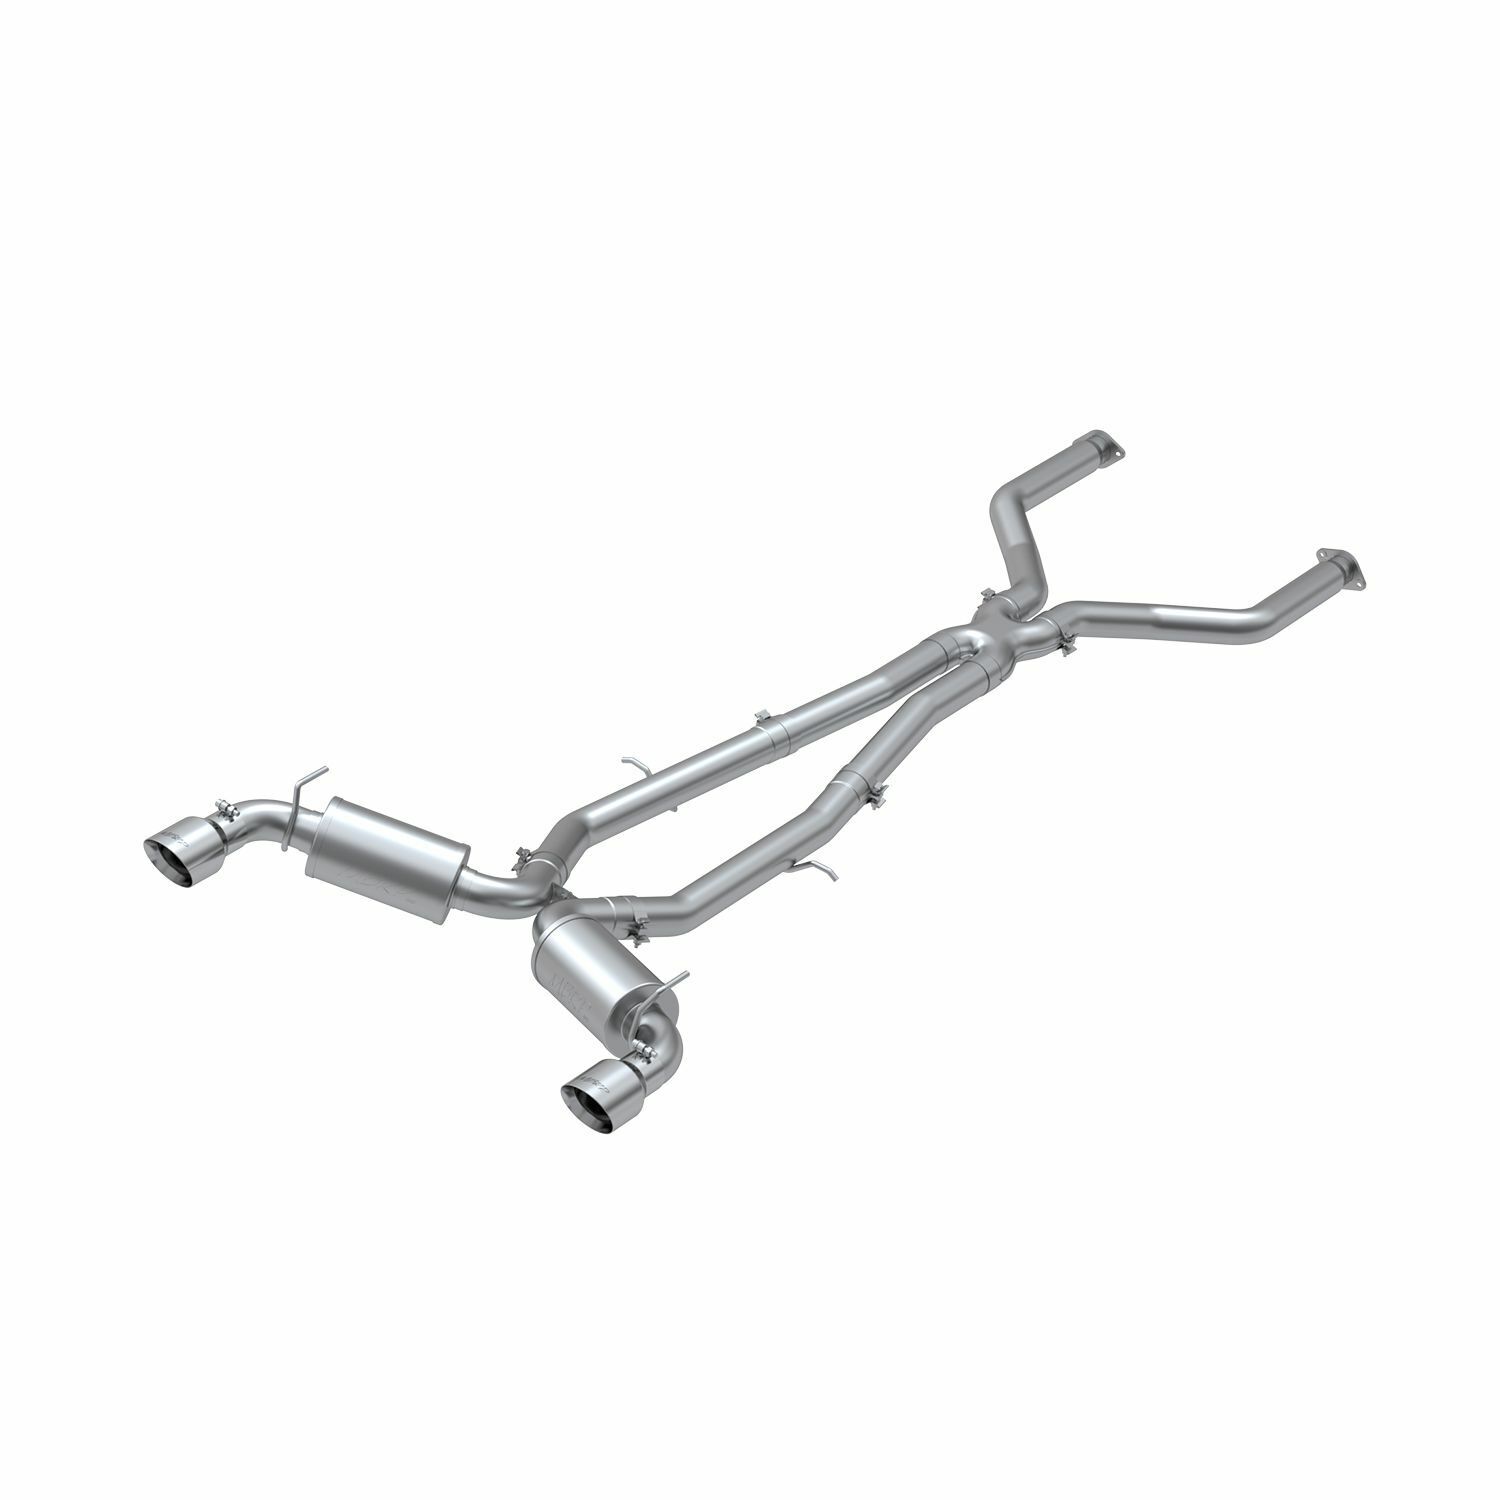 FOR 2017-2022 INFINITI Q60 3.0T 3.0L TWIN TURBO MBRP CATBACK EXHAUST SYSTEM